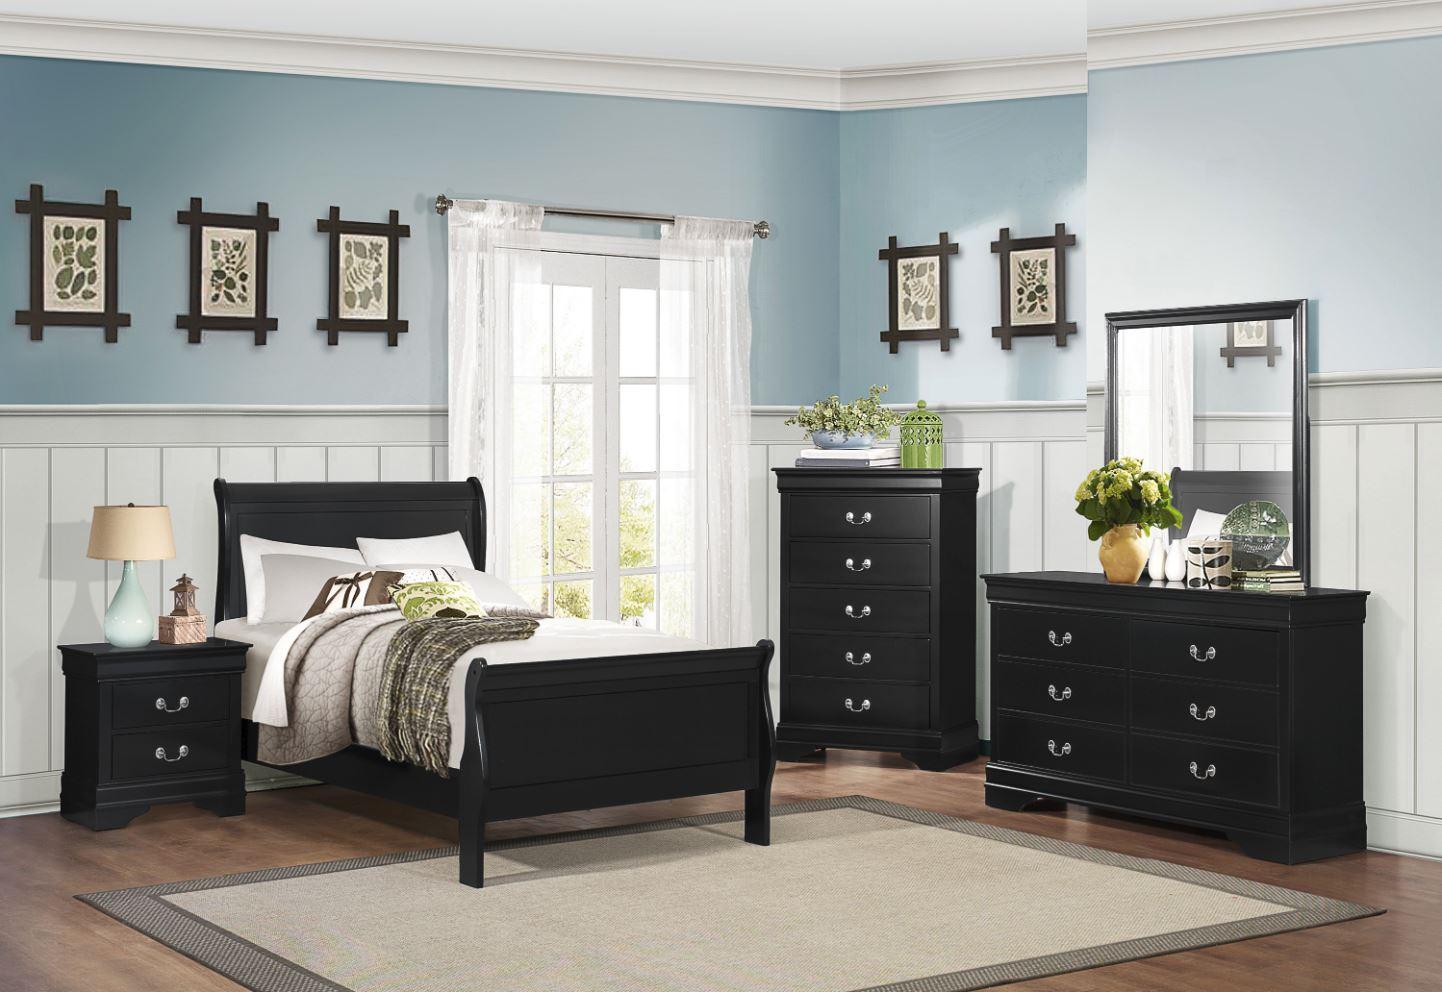 Homelegance Mayville Black Youth Full Sleigh Bed, Dresser, Mirror and Nightstand